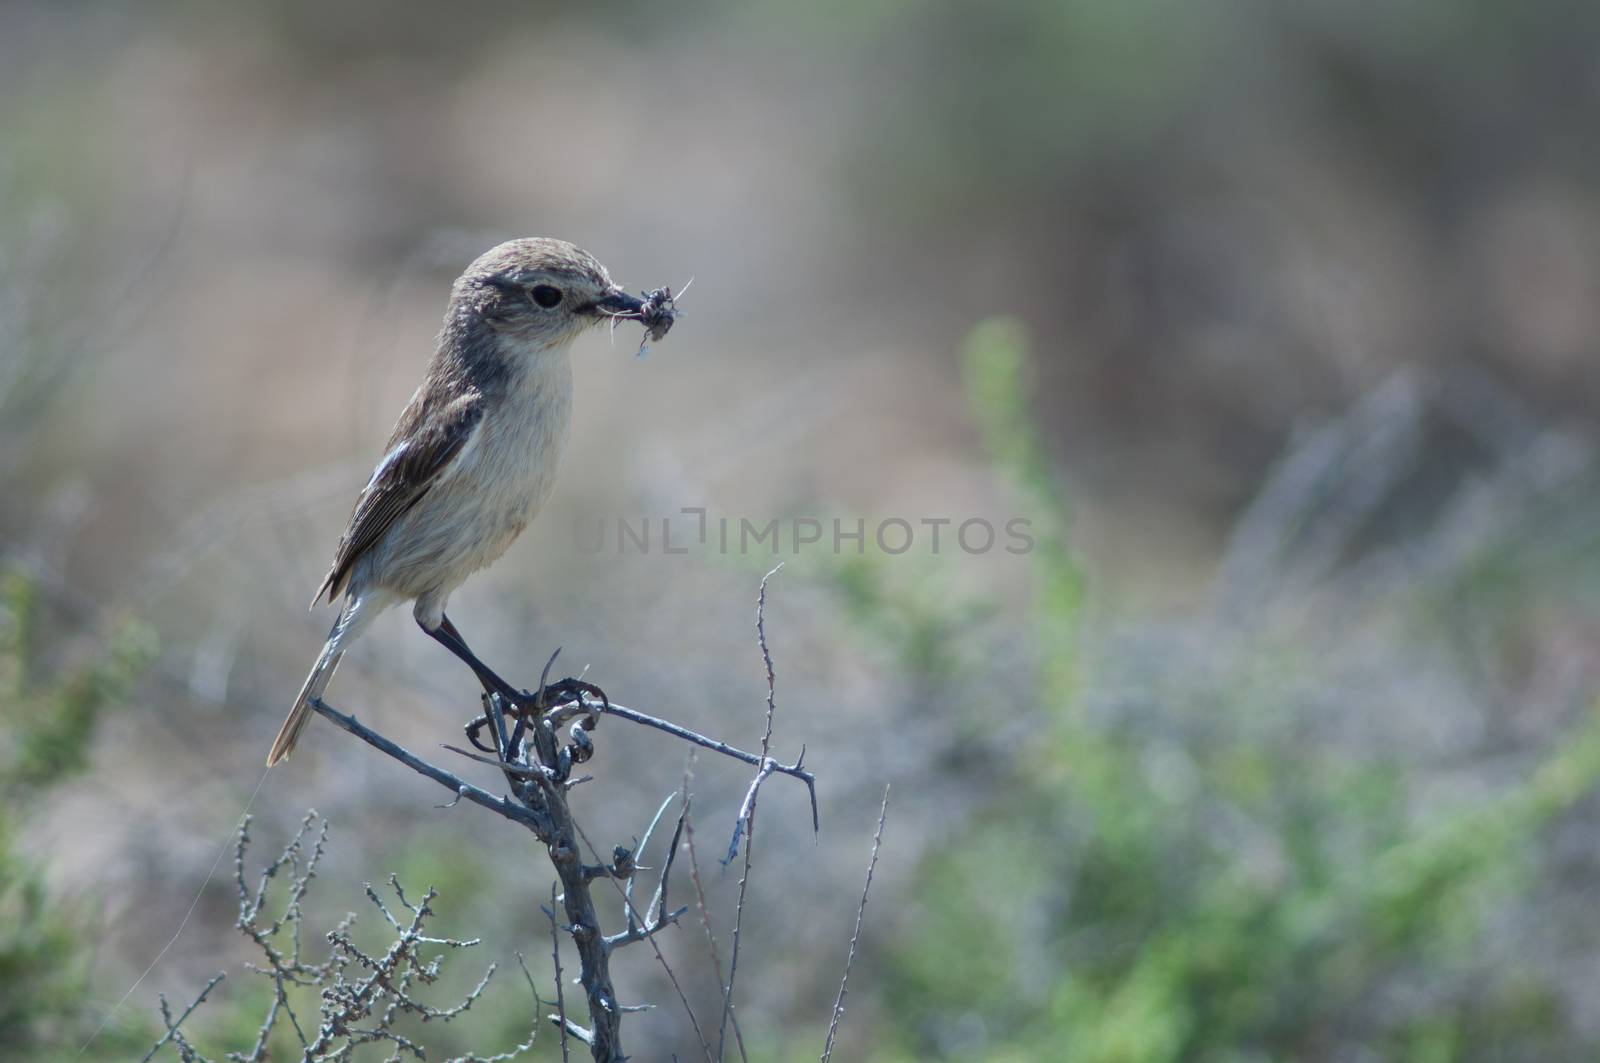 Canary Islands stonechat (Saxicola dacotiae). Female with food for its chicks. Esquinzo ravine. La Oliva. Fuerteventura. Canary Islands. Spain.